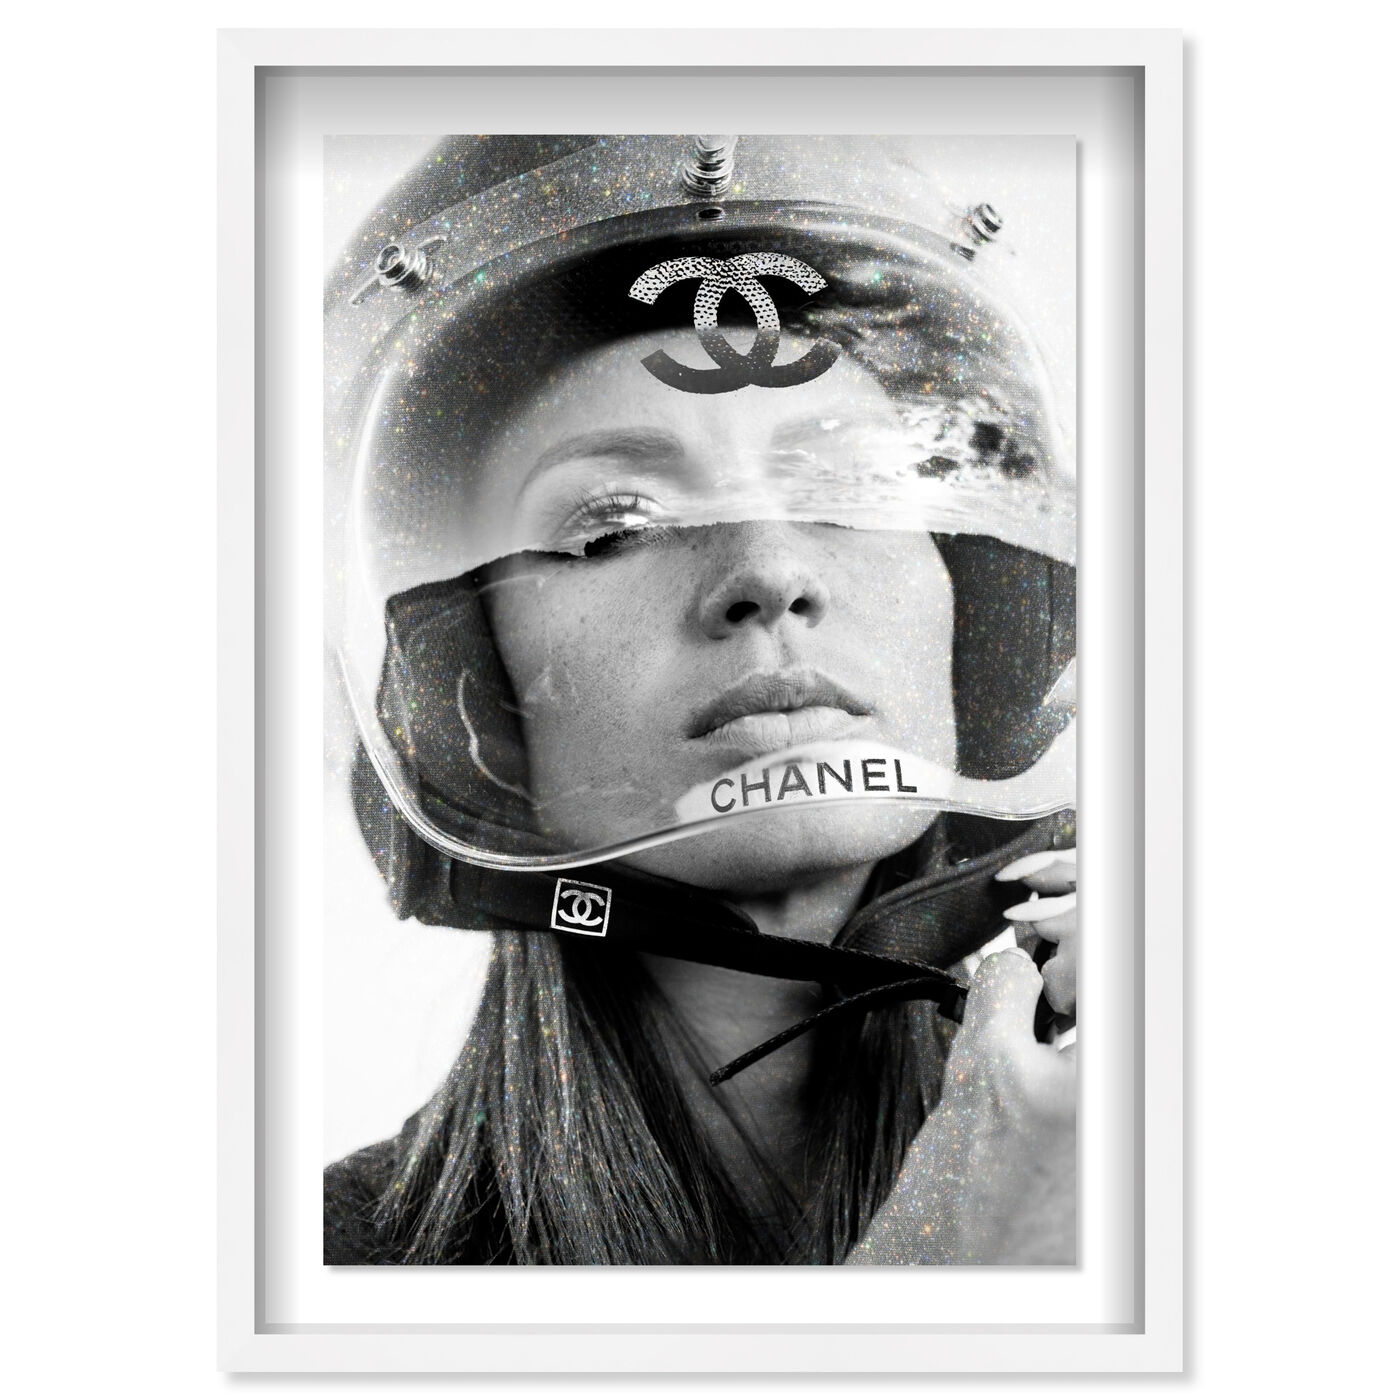 Motogirl - Displayed in a shadowbox